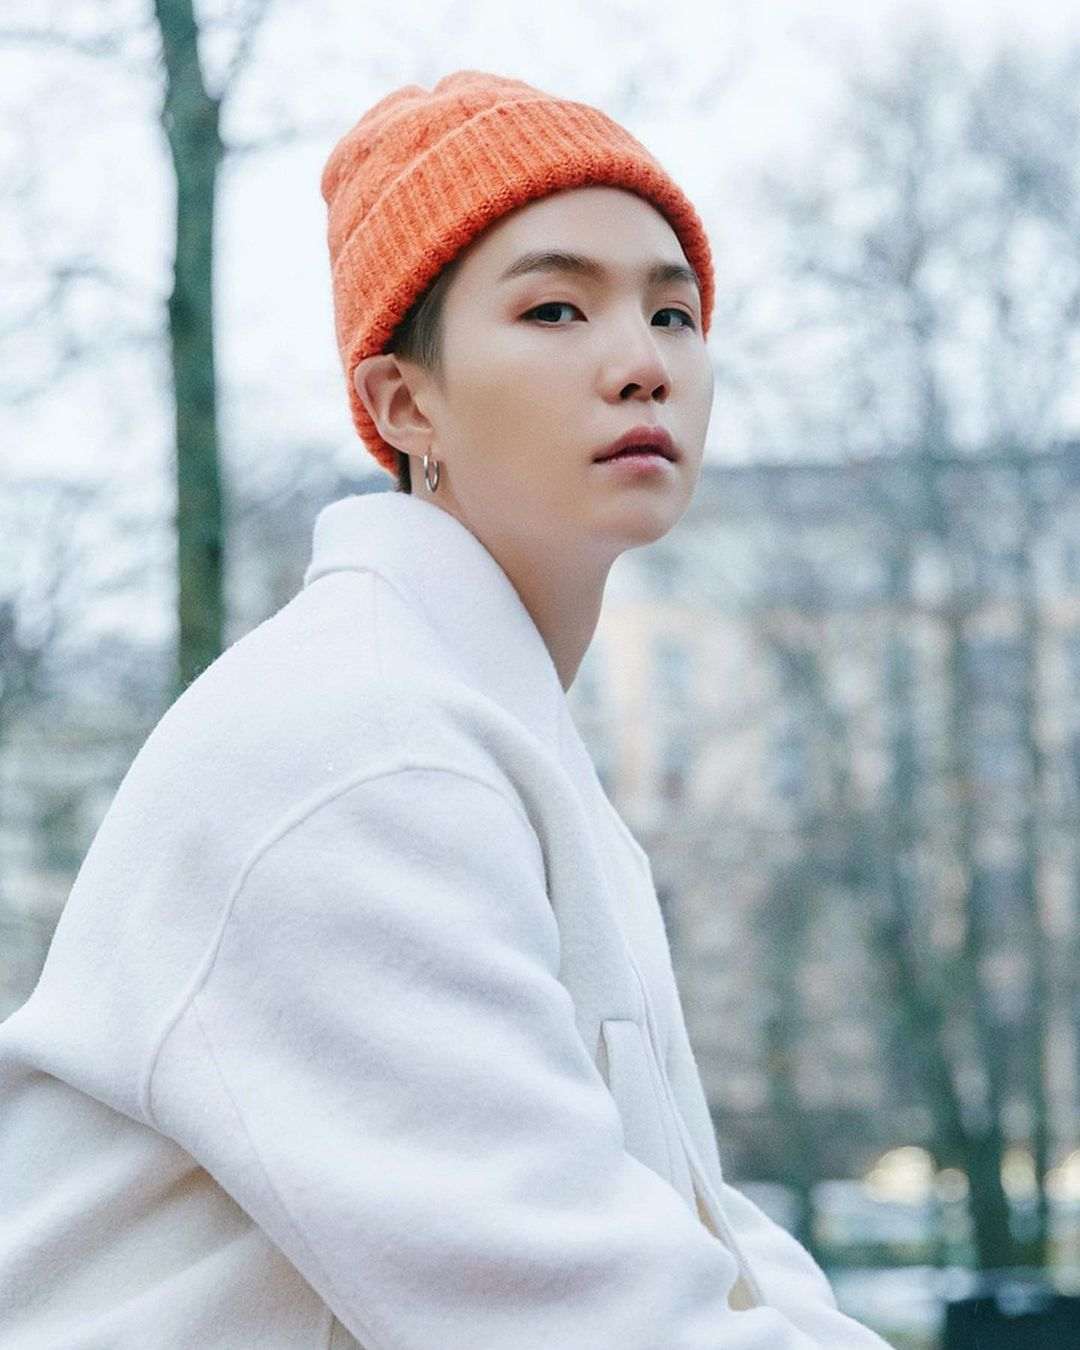 Suga BTS - Biography, Profile, Facts, and Career